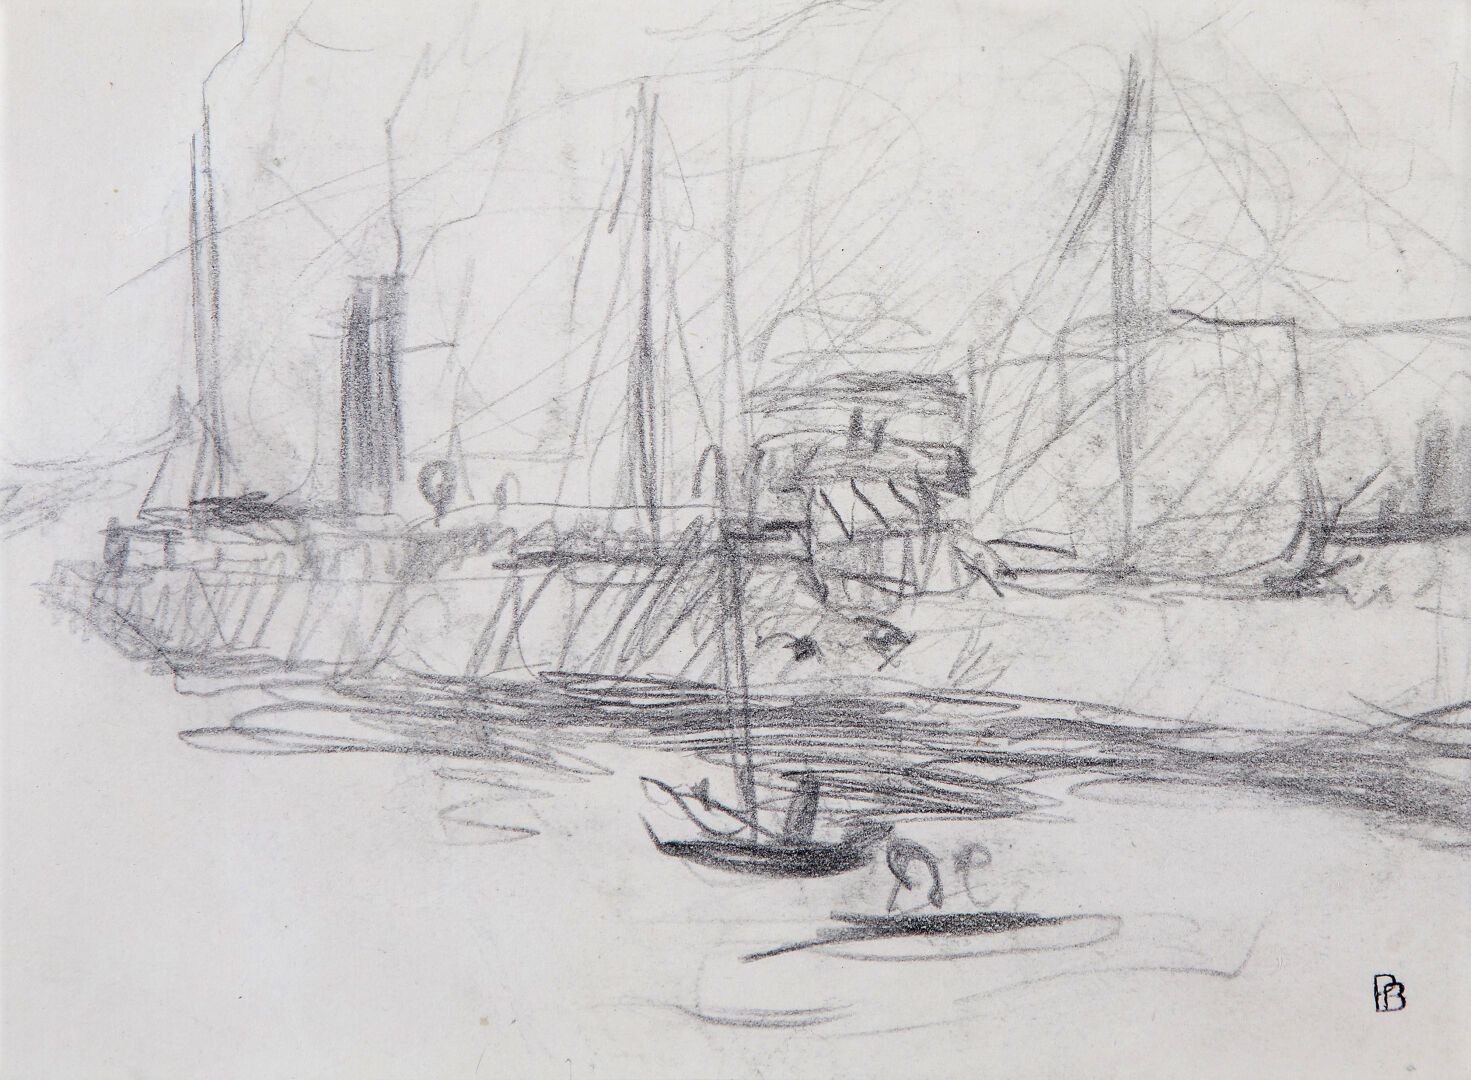 Null Pierre BONNARD (1867-1947)
Boats and sailboats in the harbor 
Lead pencil
B&hellip;